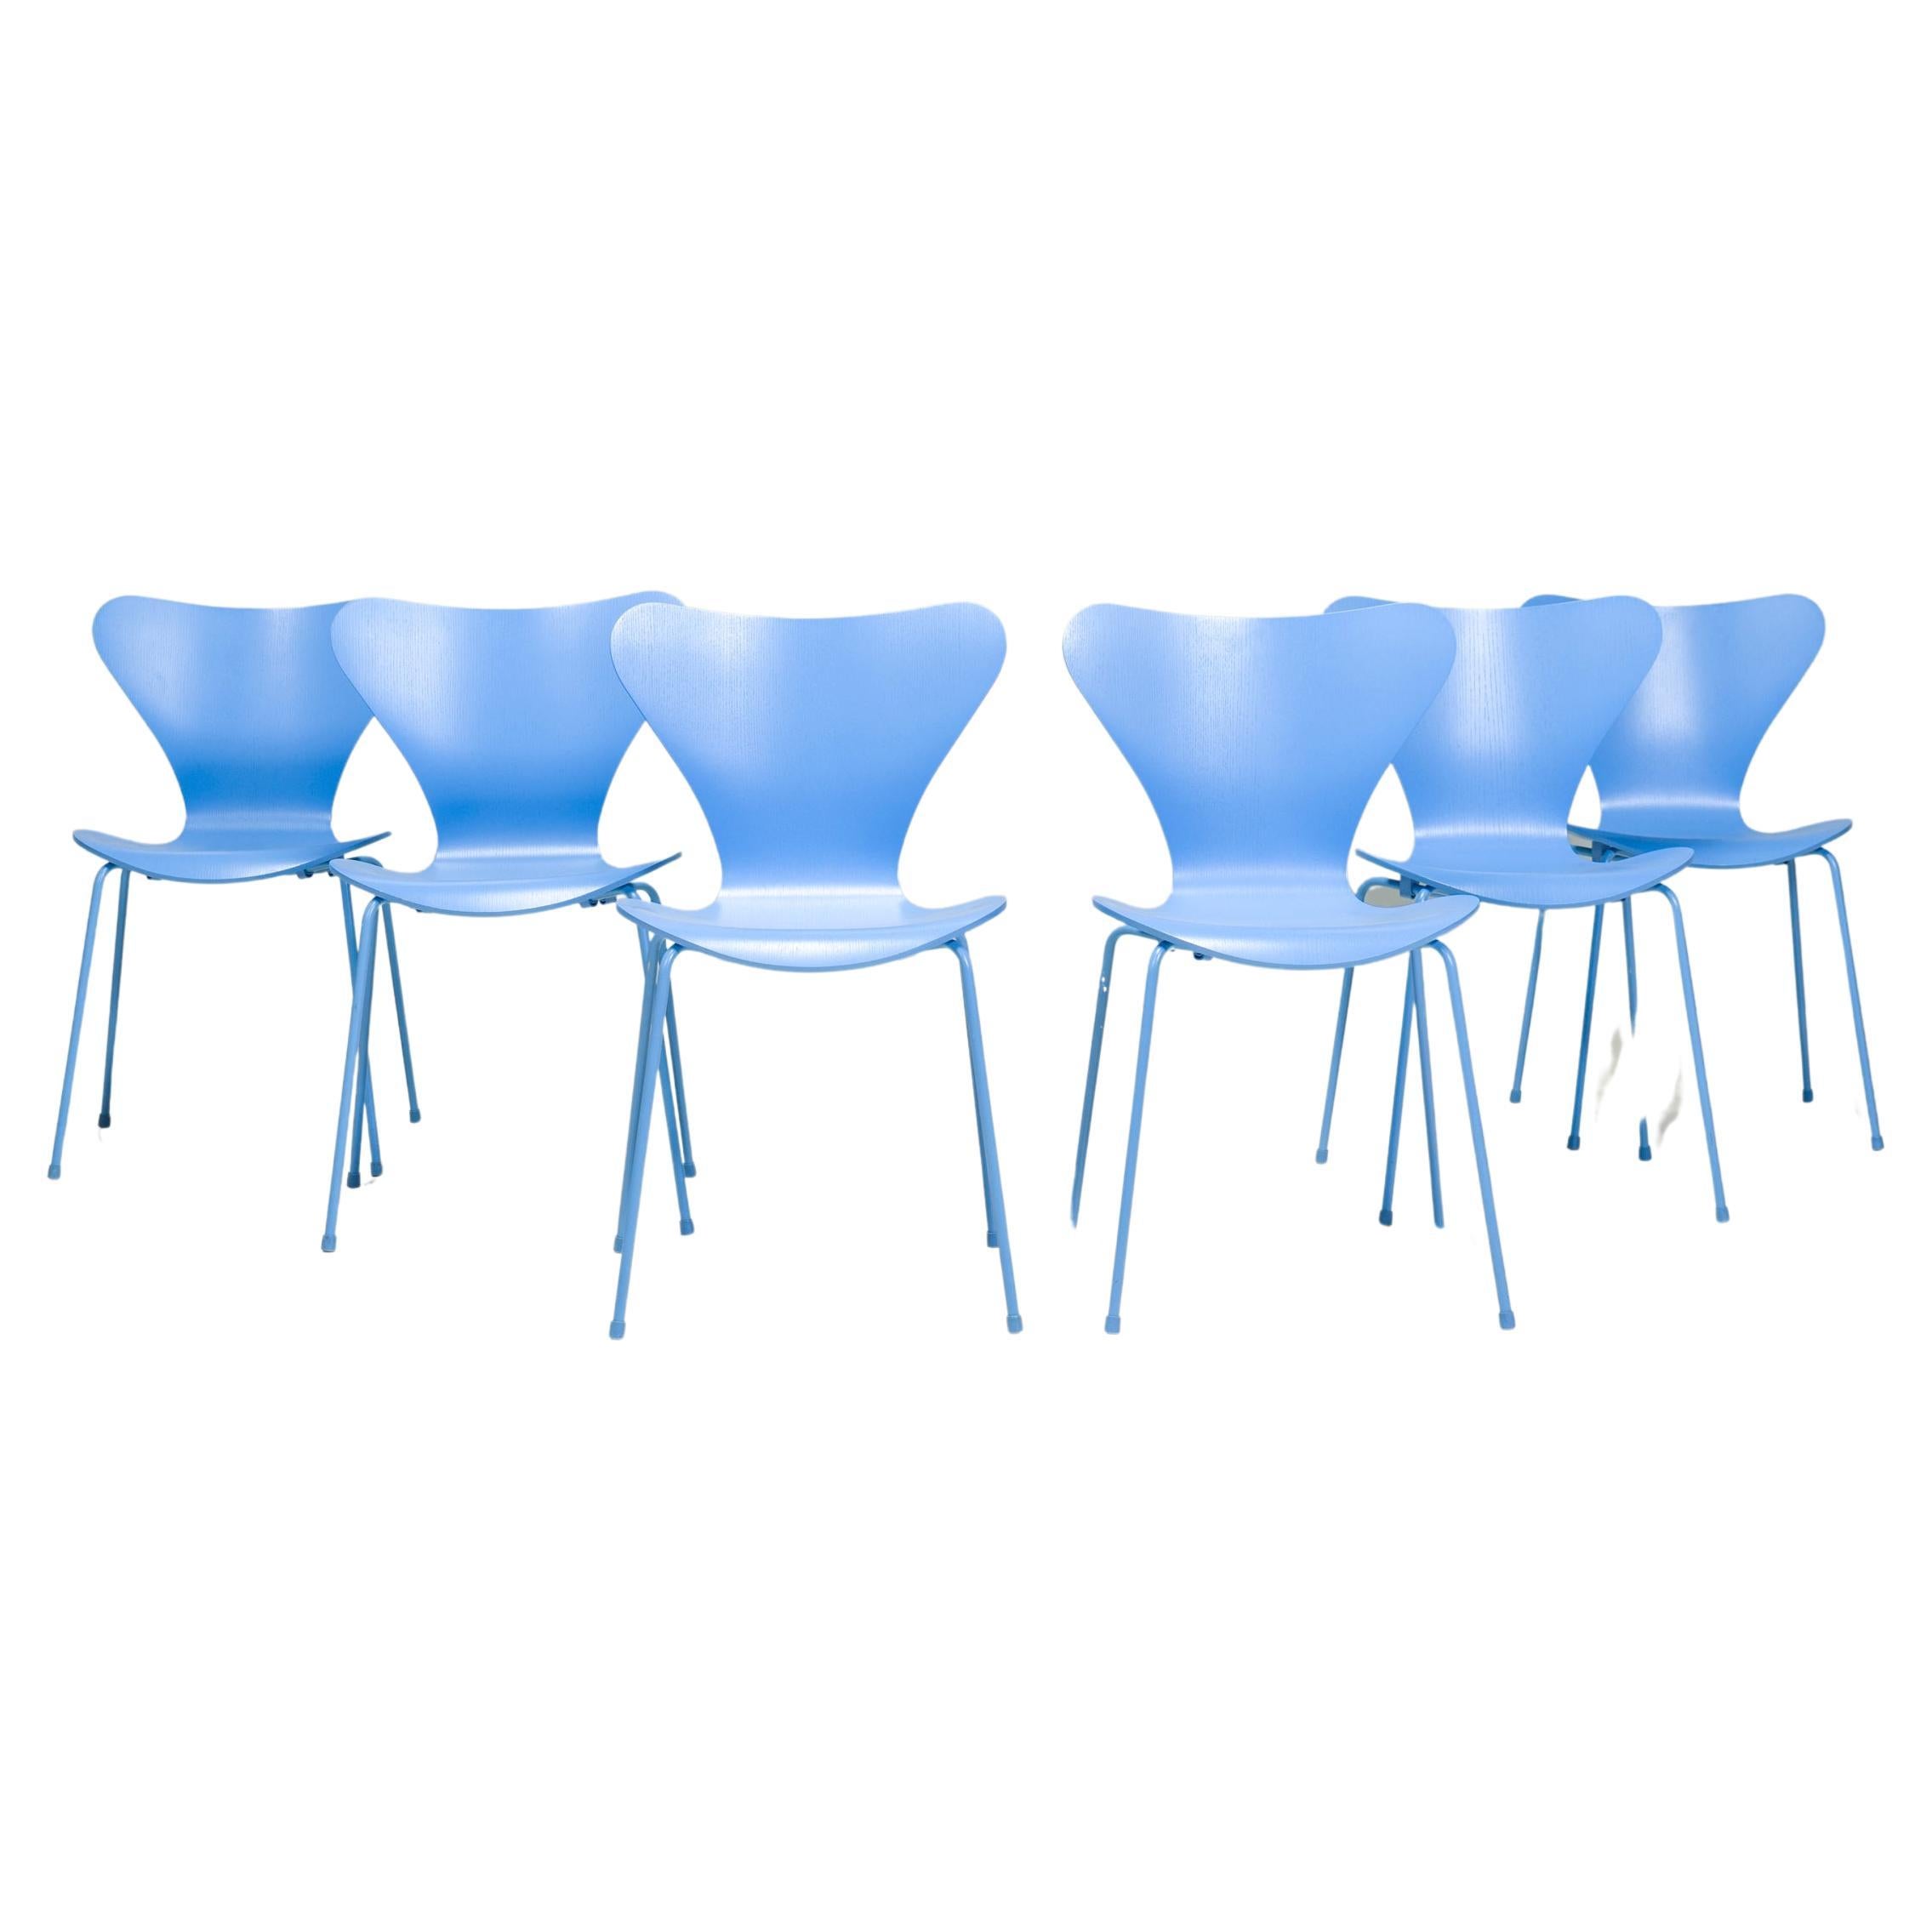  Fritz Hansen by Arne Jacobsen Monochrome Blue Series 7 Dining Chairs, Set of 6 For Sale